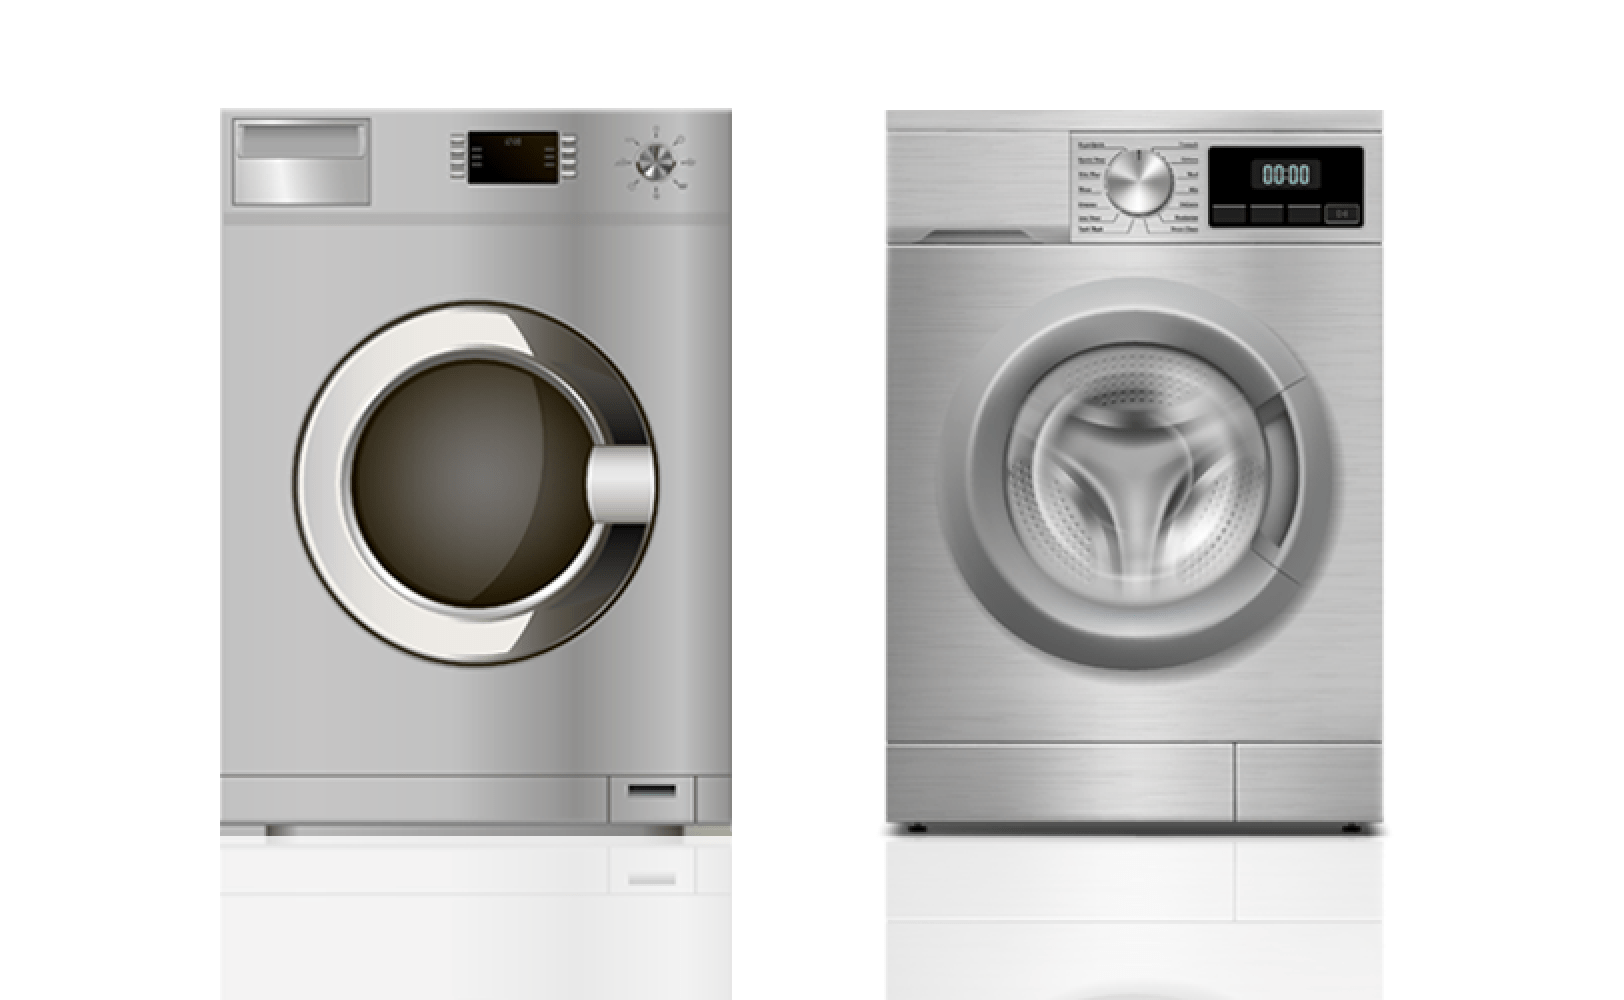 Washer Repair Service in East Moriches